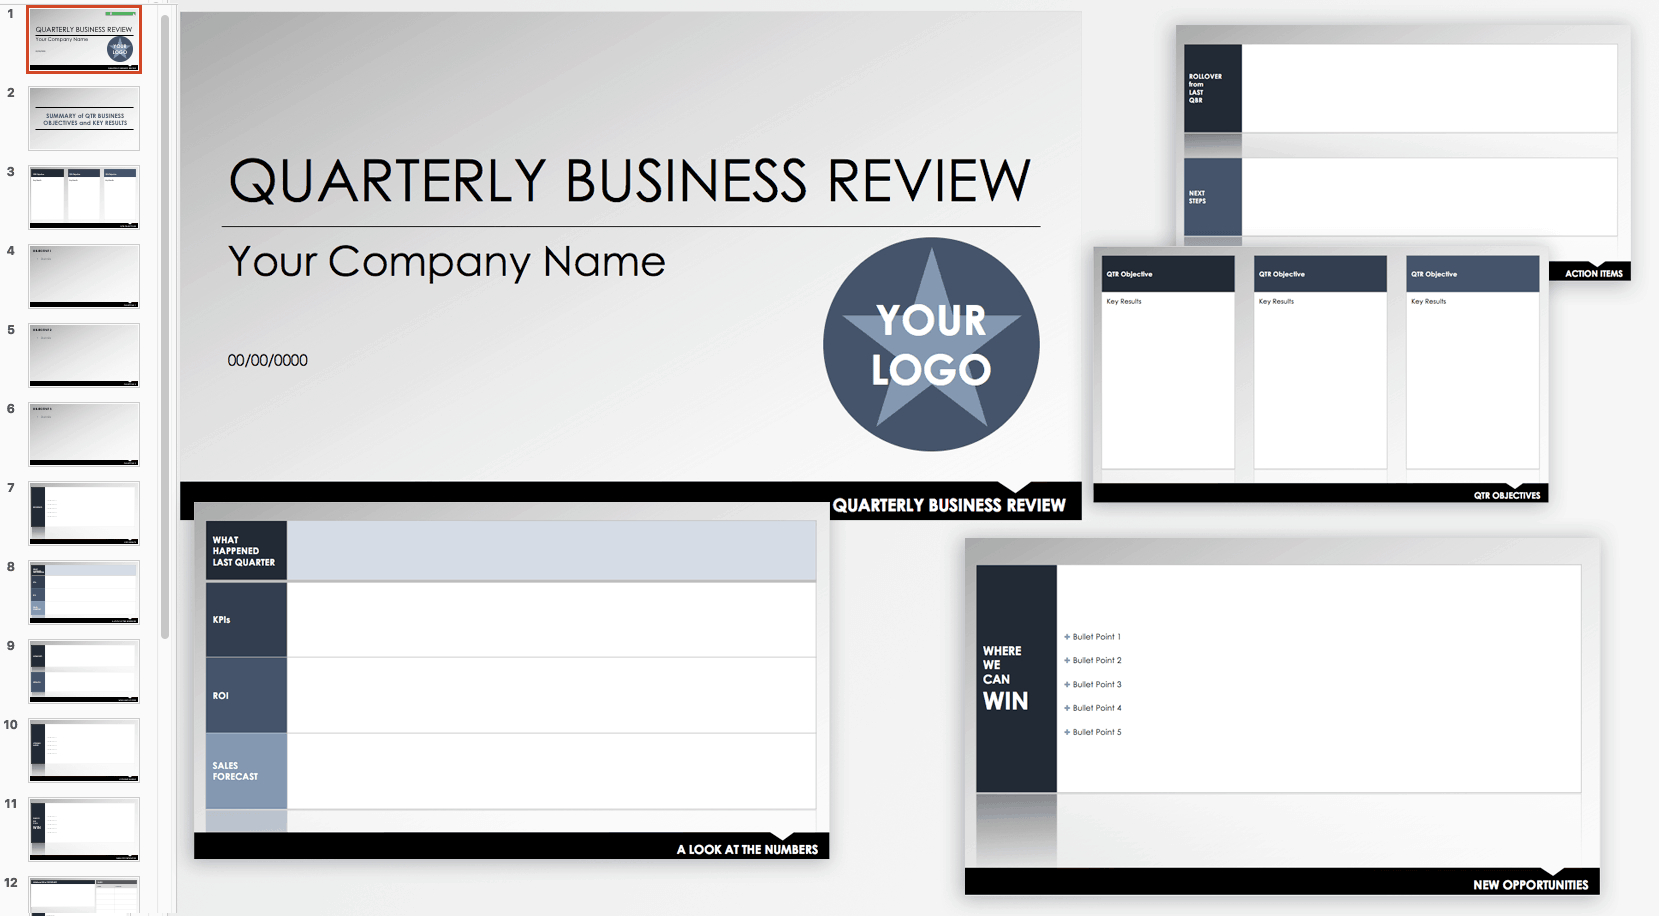 Free Qbr And Business Review Templates | Smartsheet Pertaining To Business Review Report Template